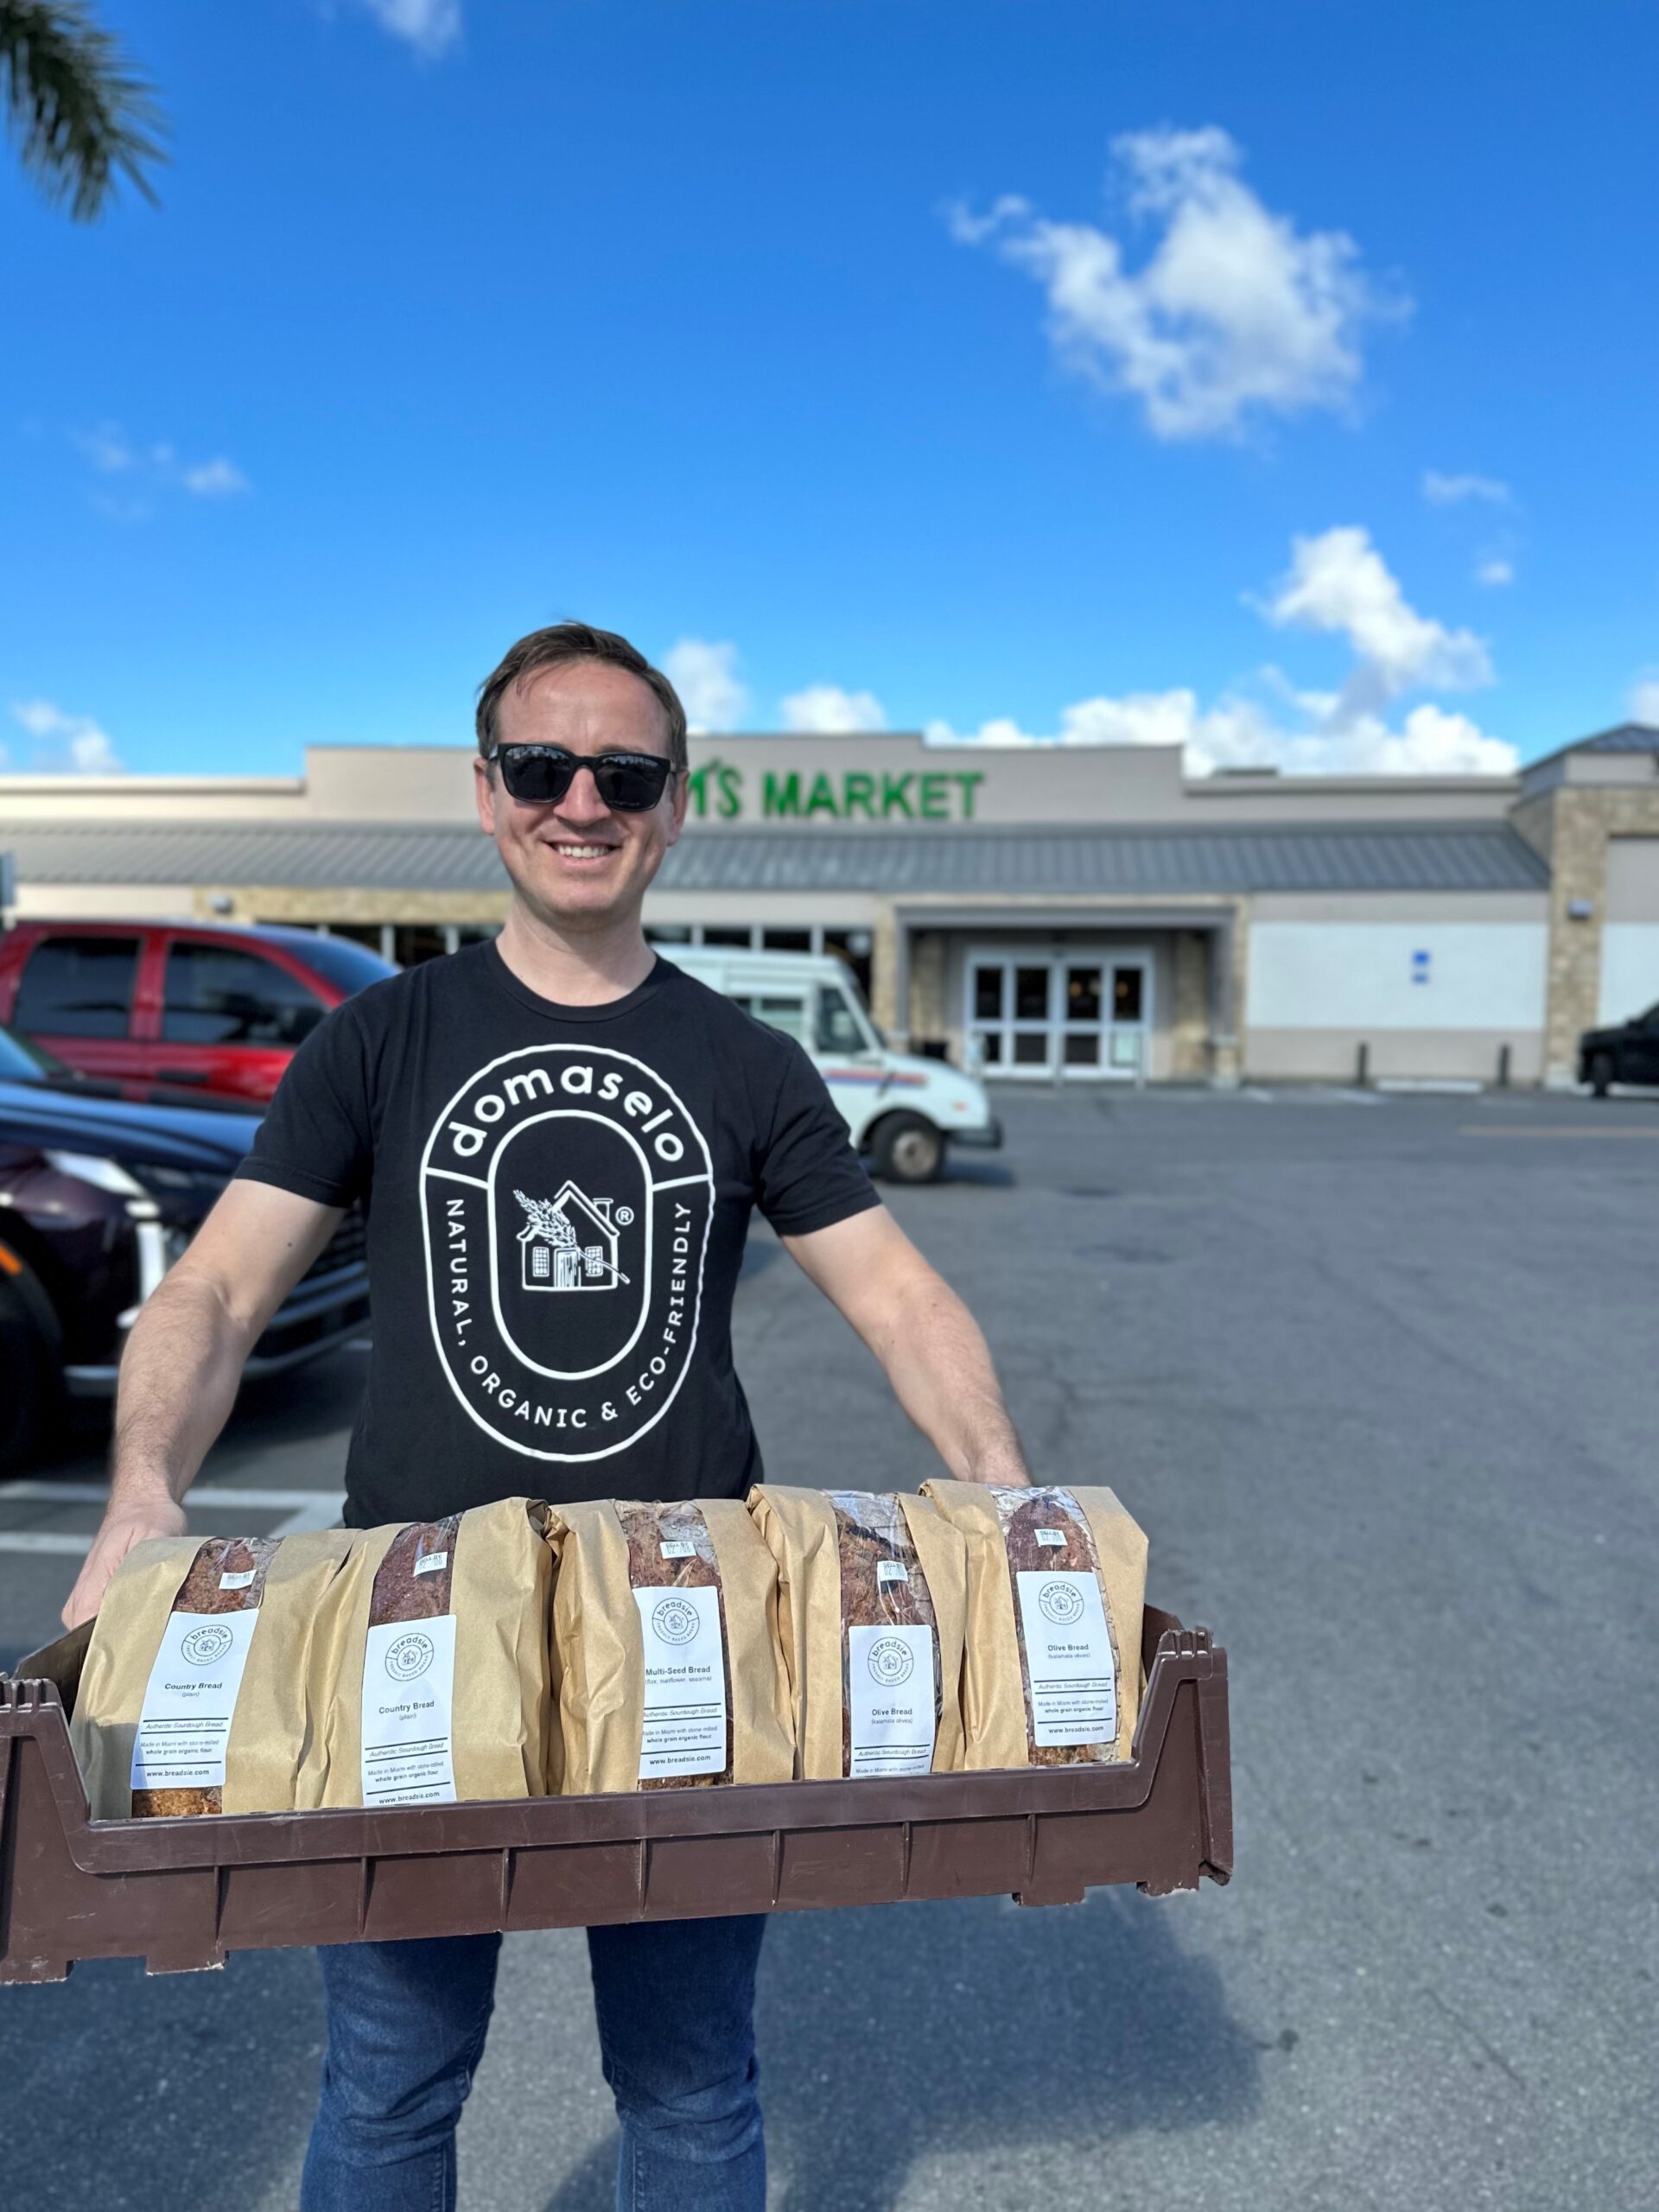 Emil of Domaselo bread carrying a box of packaged breads in the Milam's Markets parking lot